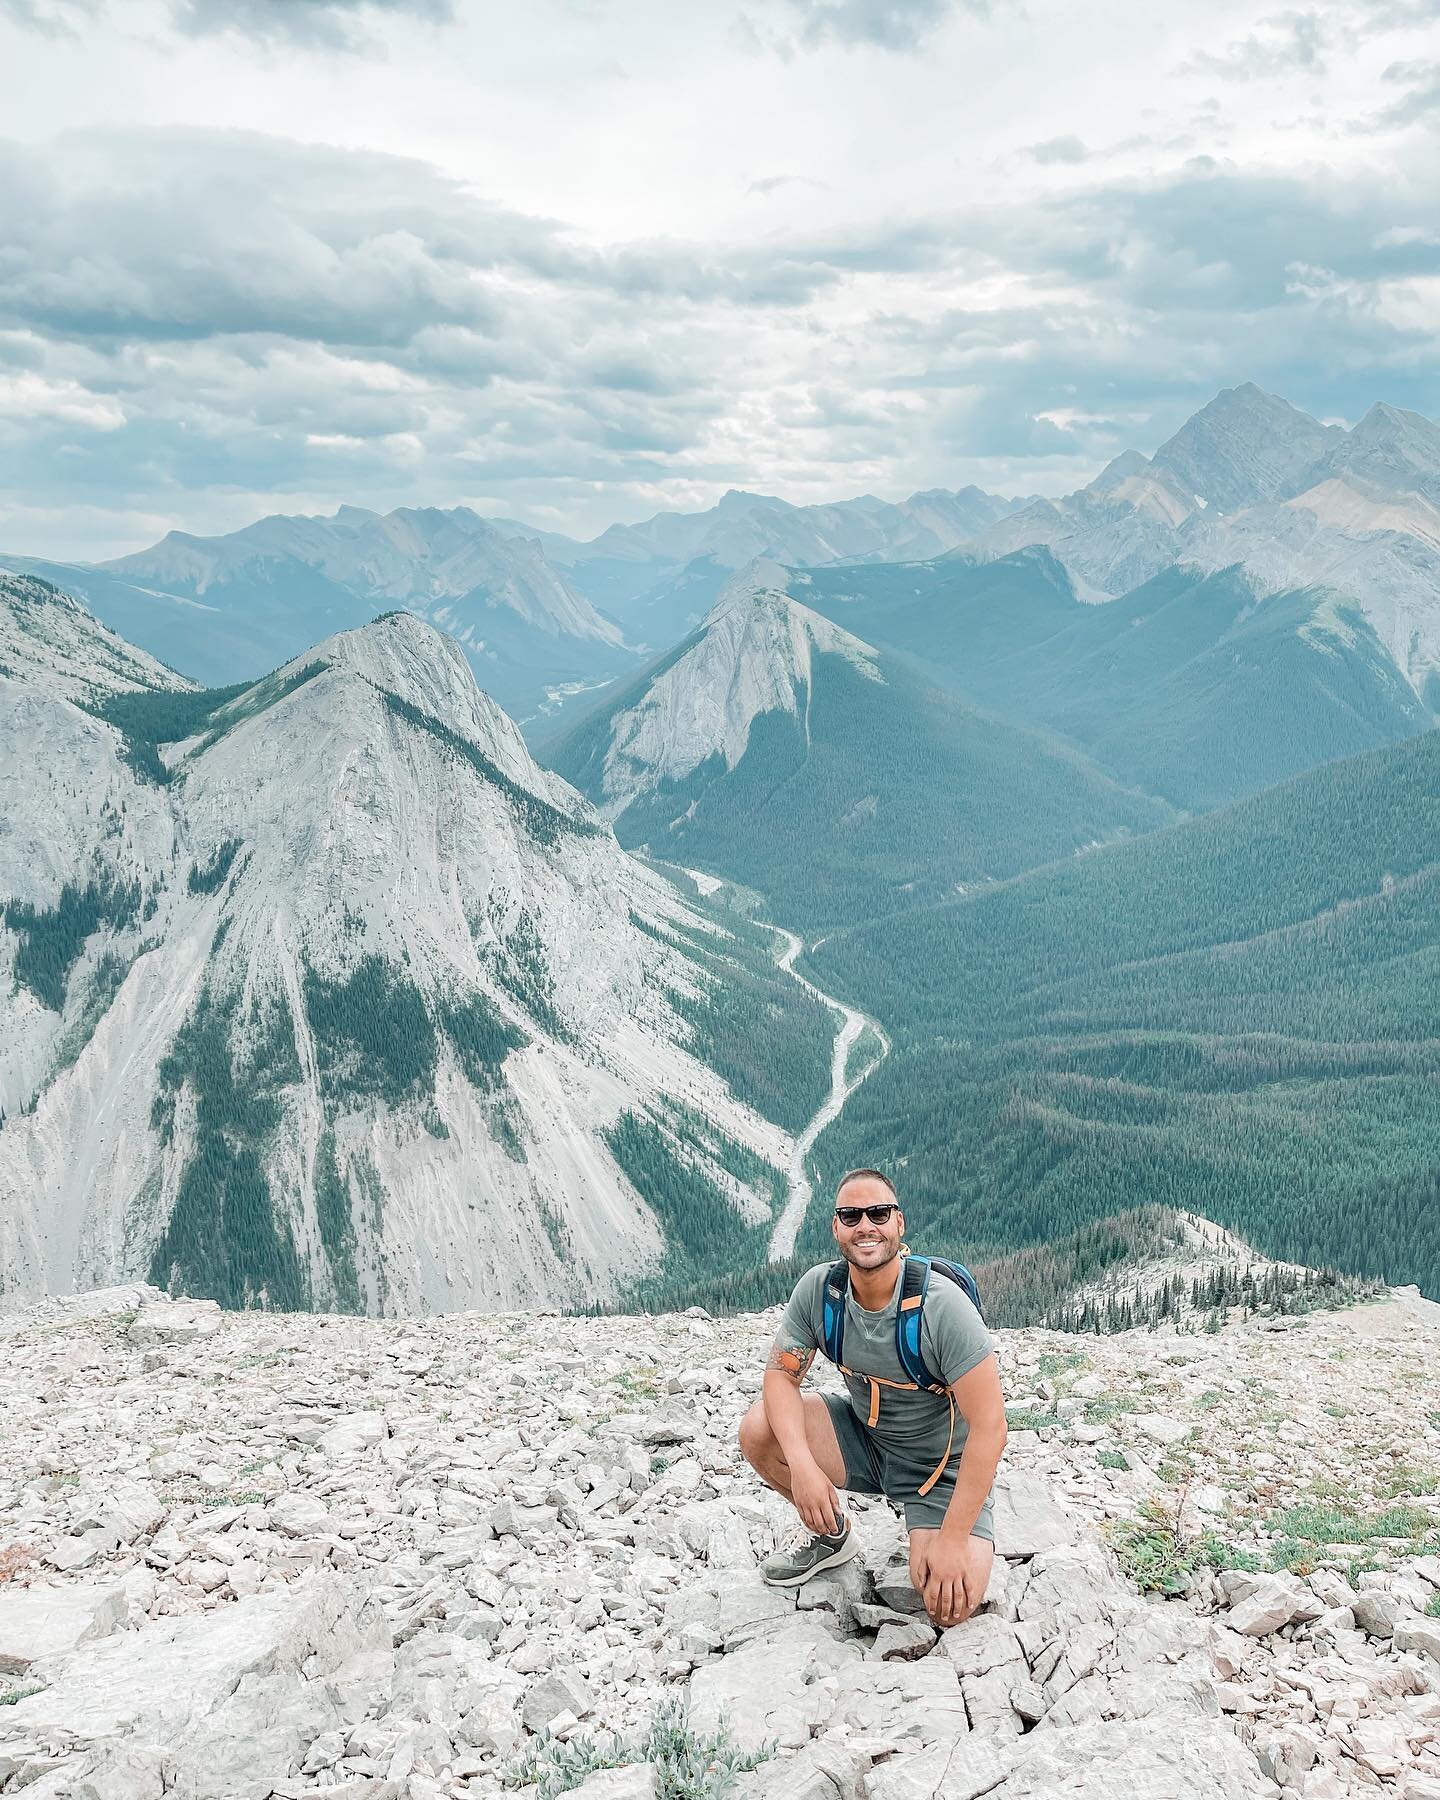 The Sulpher Skyline trail in Jasper was hands down one of the hardest hikes that Rikki and I have ever done. From the very beginning it was an incline up a mountain with no flat areas. The last 400 meters was the most intense but it was well worth th